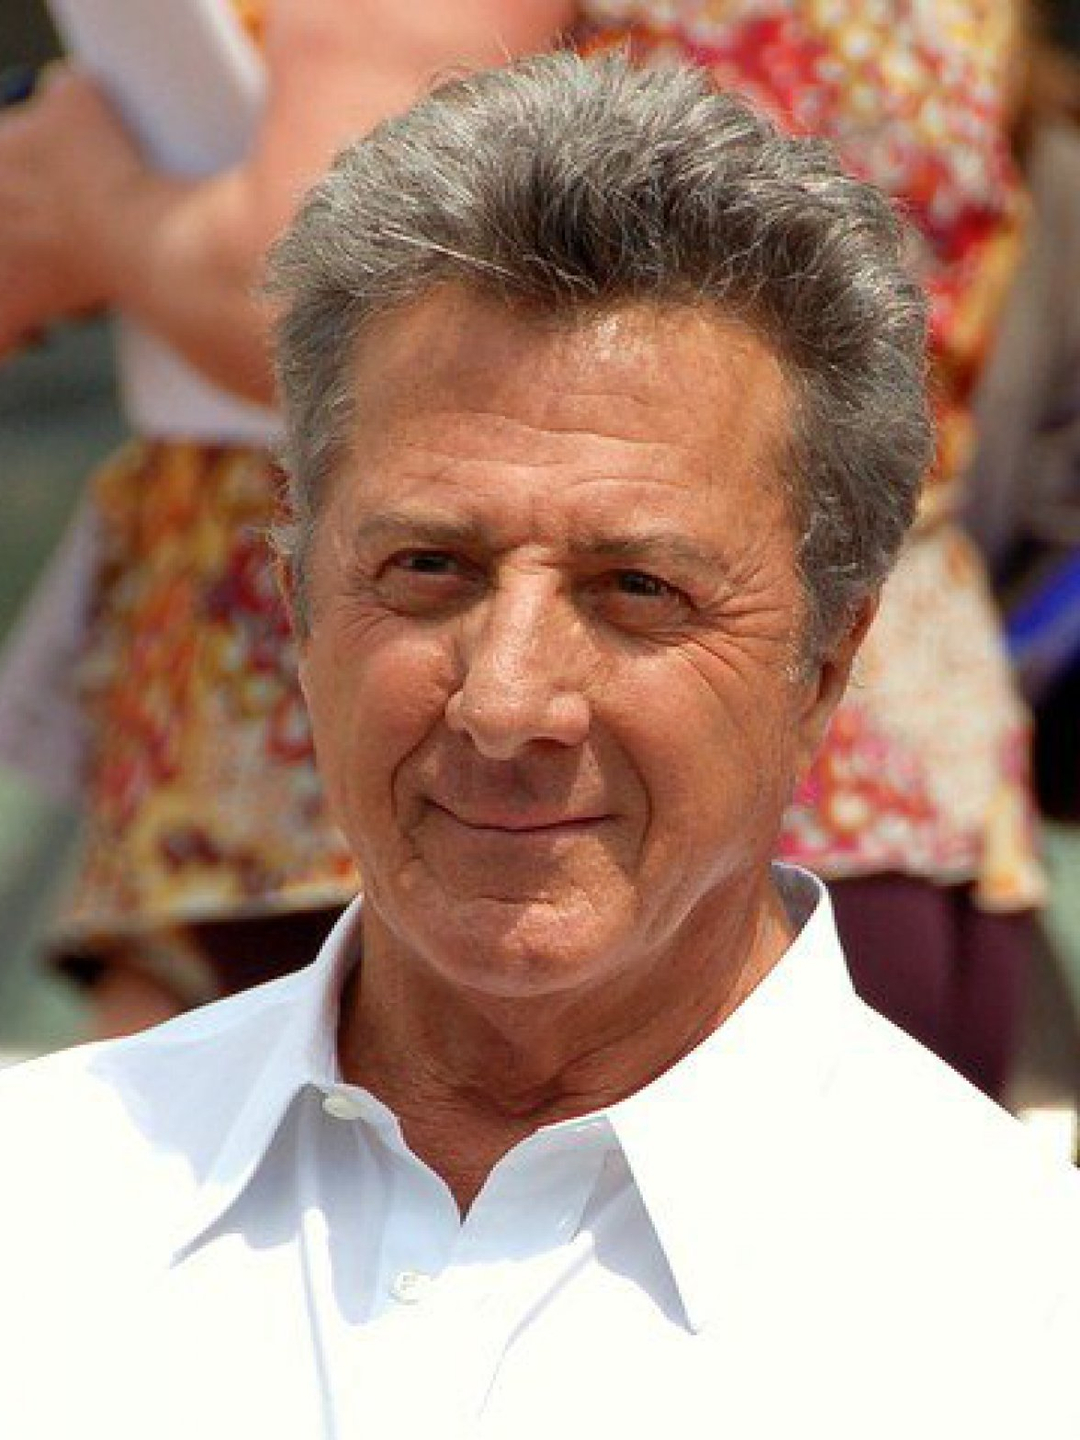 Dustin Hoffman where does he live